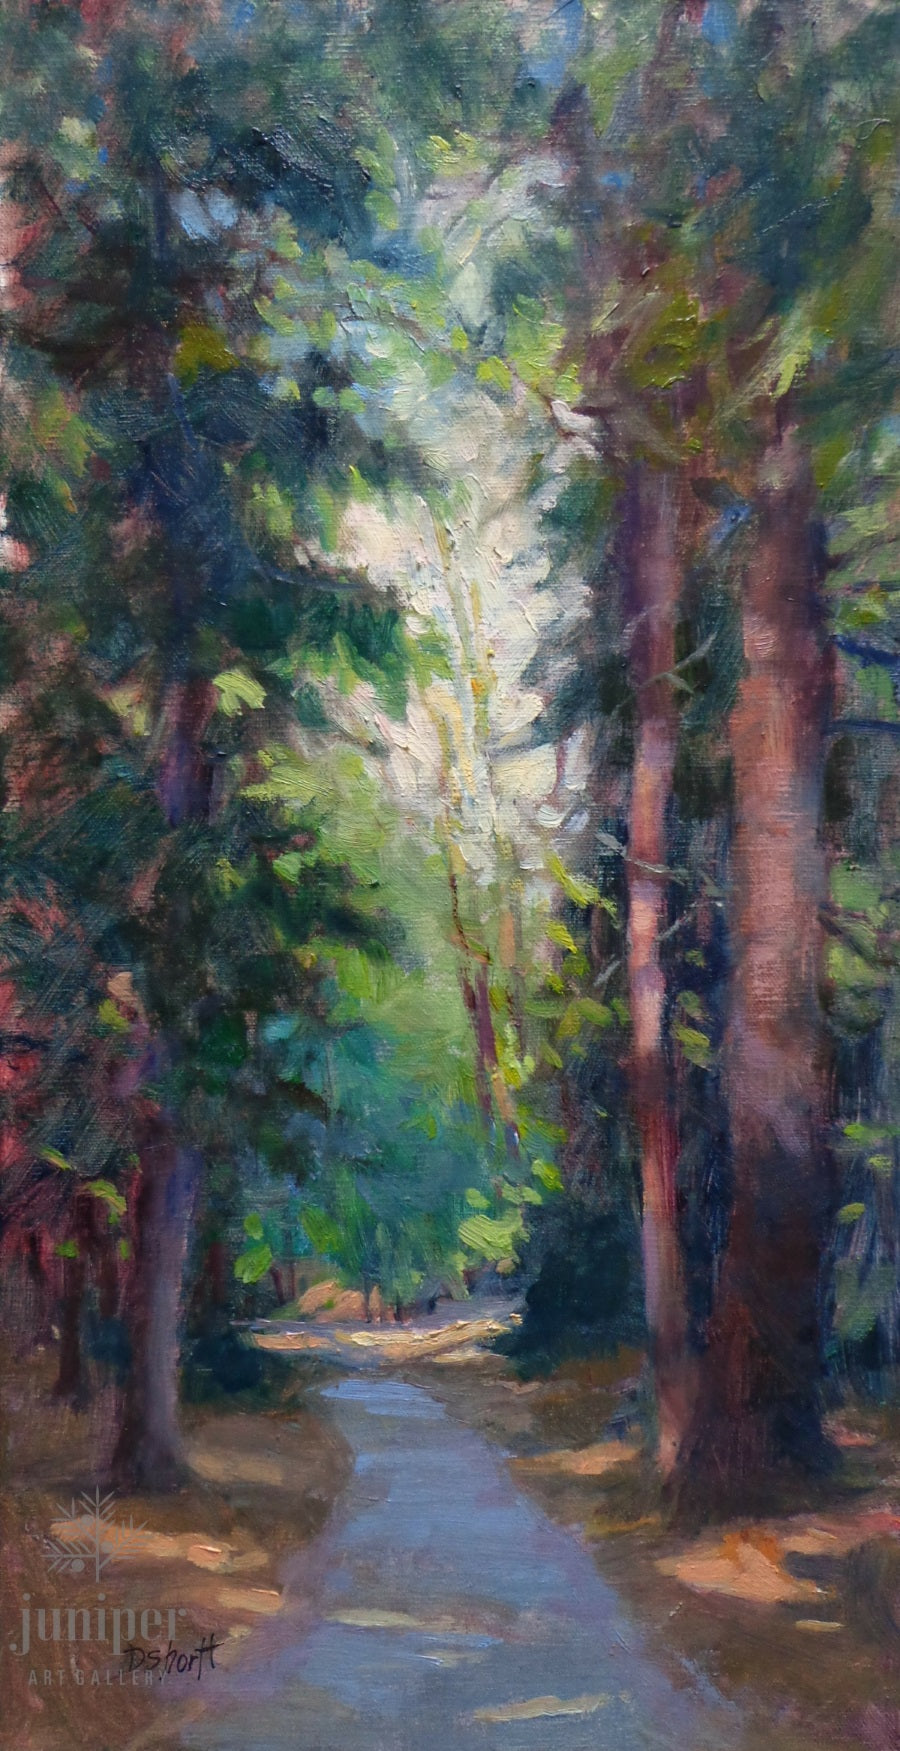 SOLD! Walk Between, oil painting by Donna Shortt